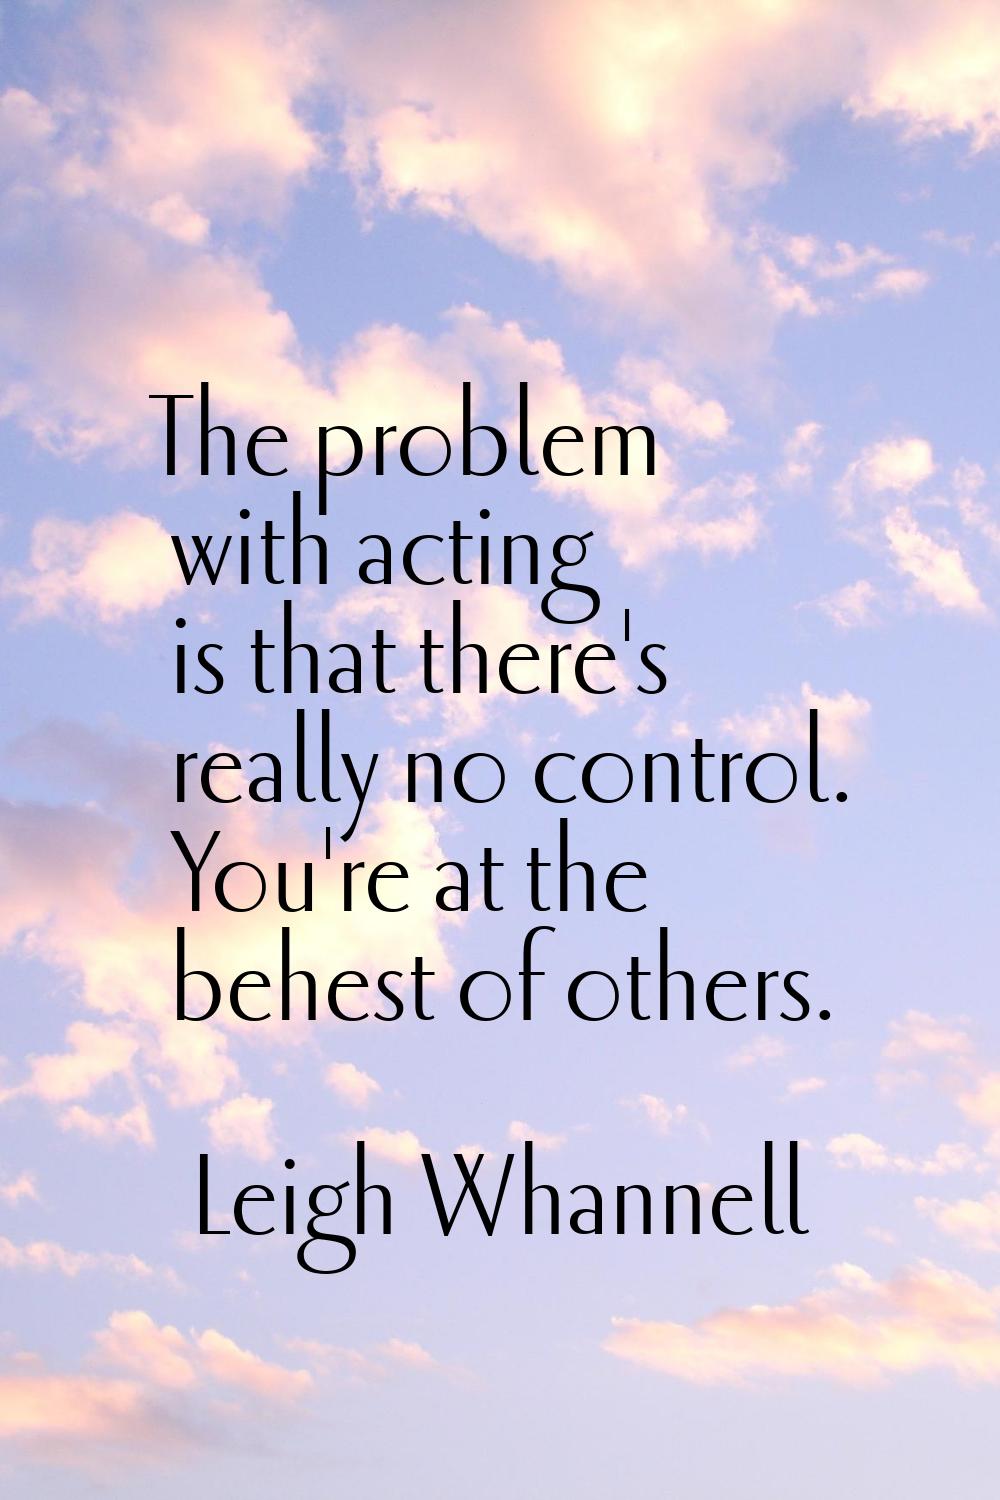 The problem with acting is that there's really no control. You're at the behest of others.